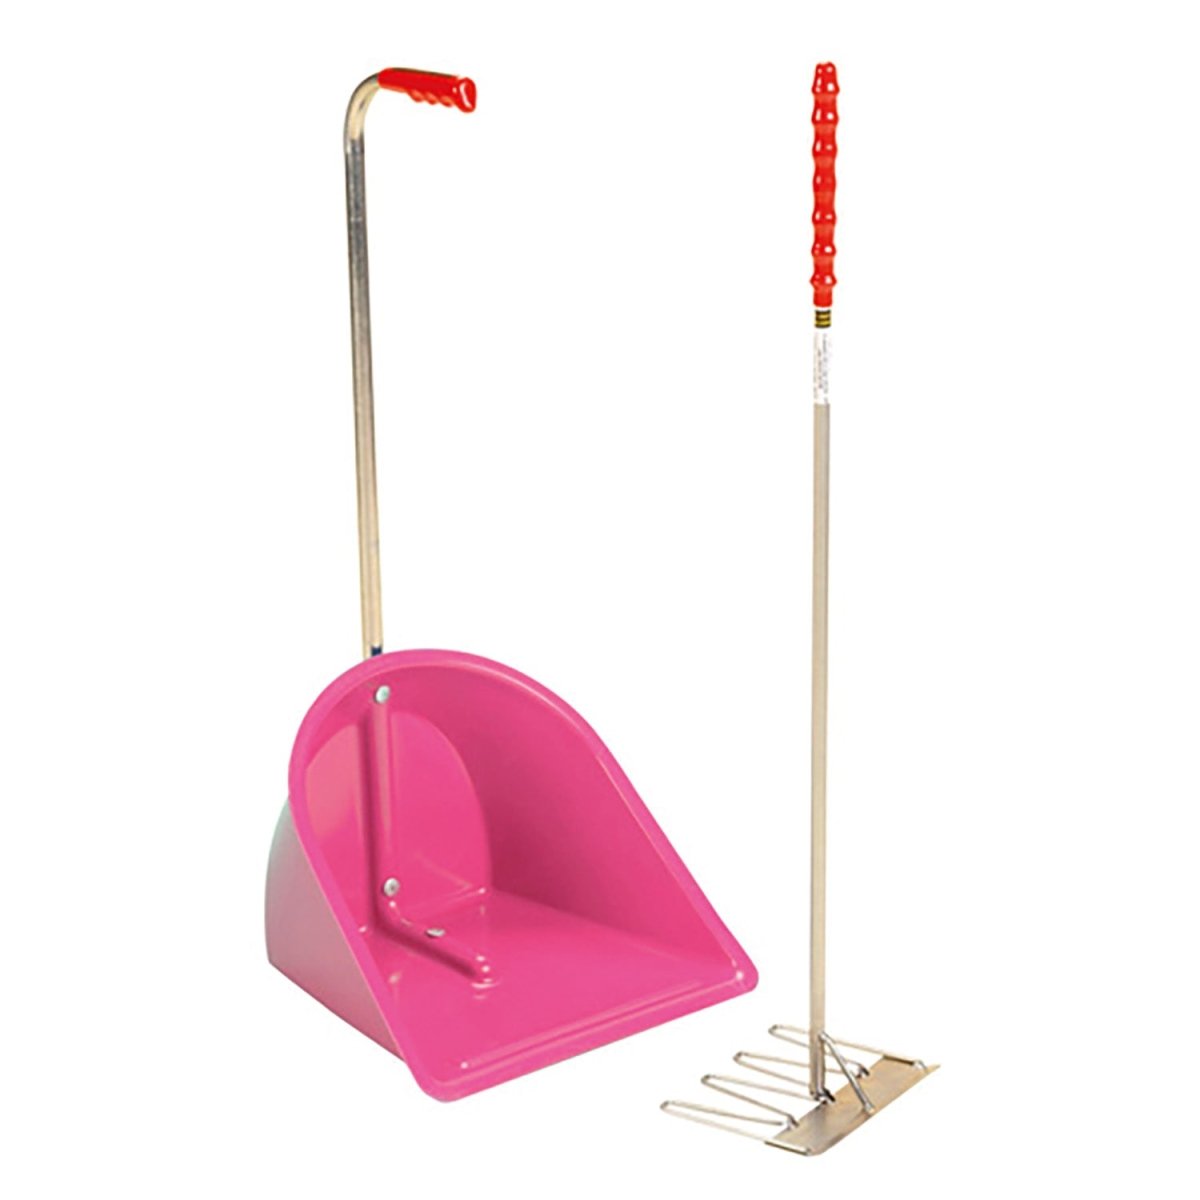 Stubbs Stable Mate Manure Collector High with Rake - Pink -